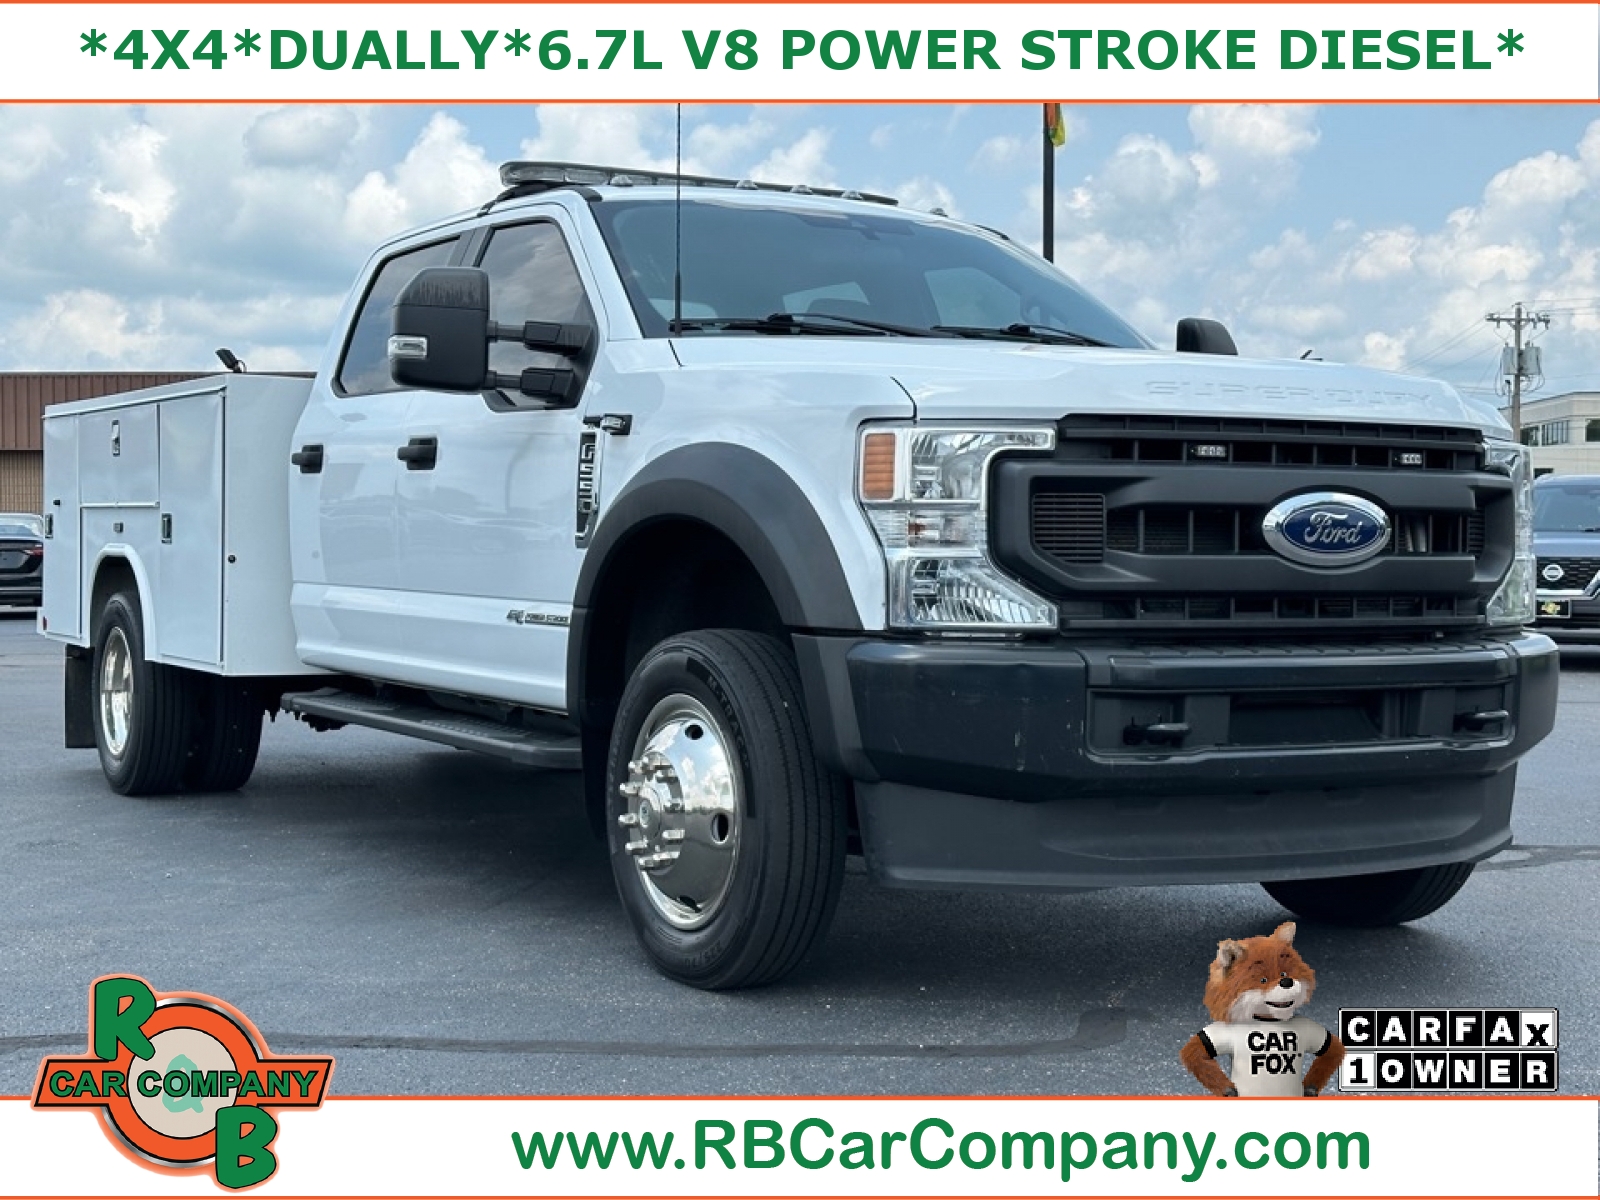 2014 Ford Super Duty F-550 DRW Chassis C XL, 35445, Photo 1